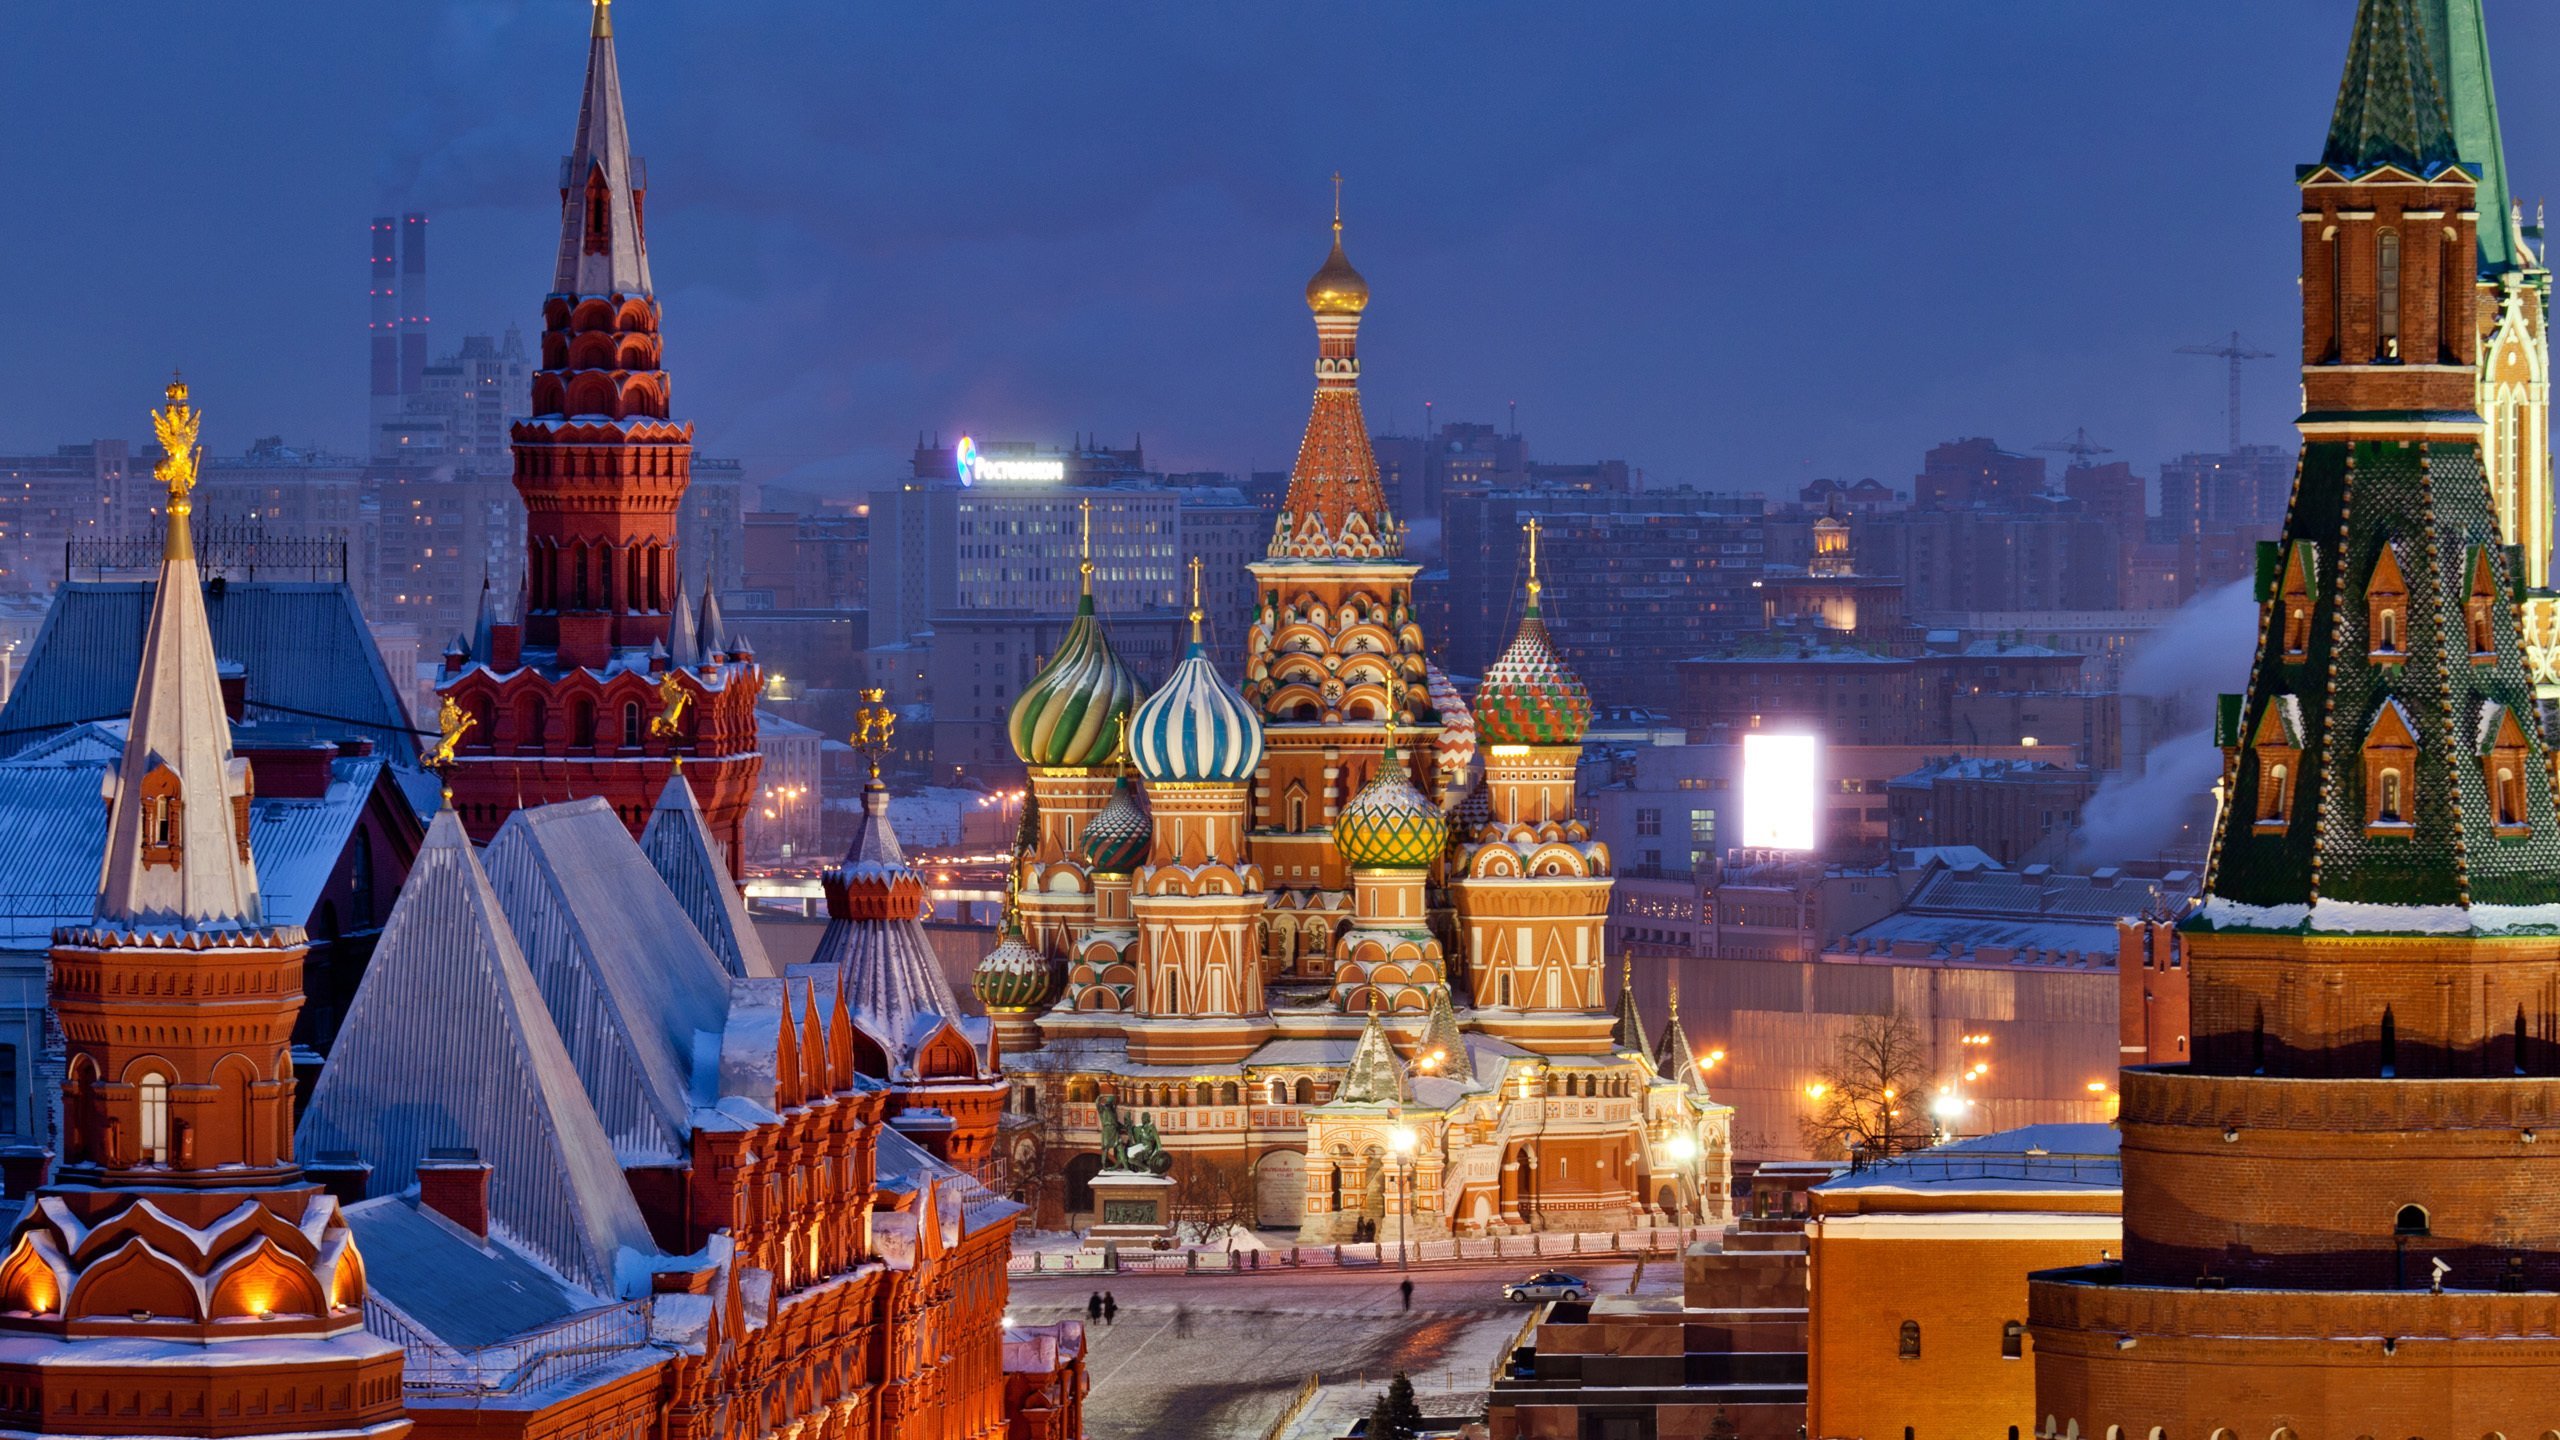 2560x1440 px city light Moscow night snow winter High Quality Wallpapers,High Definition Wallpapers